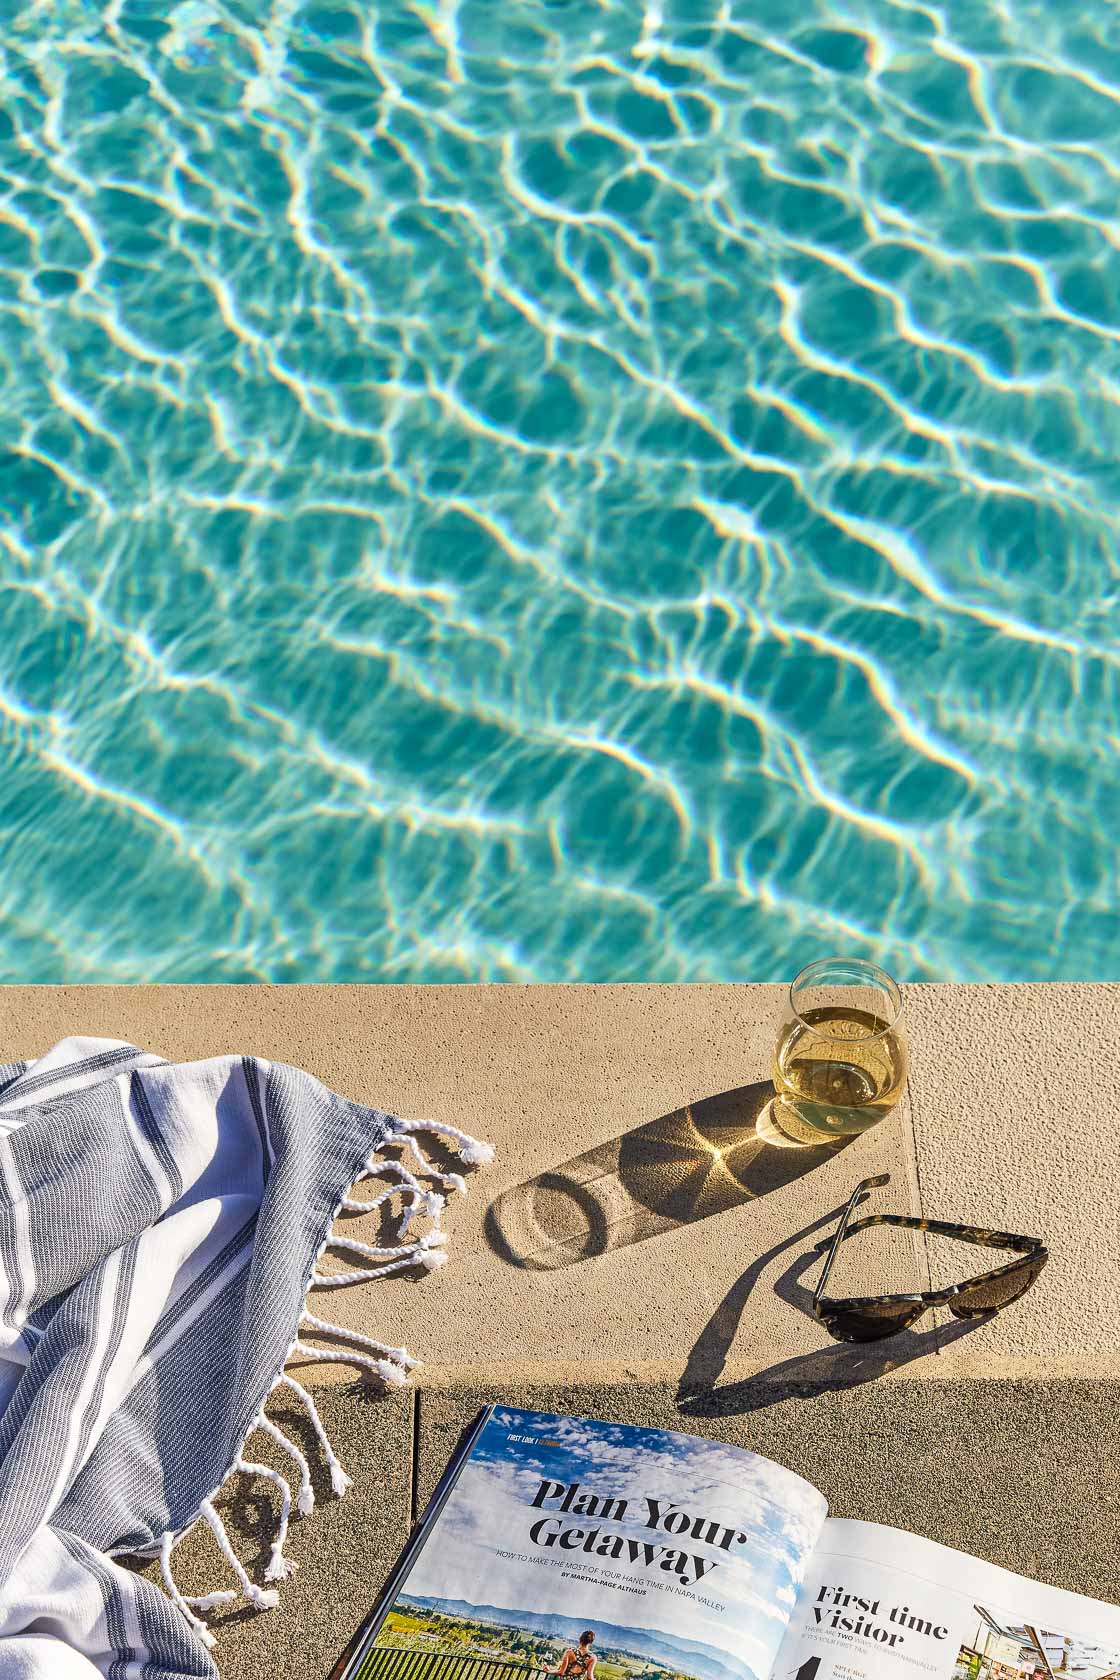 View of a part of a pool with a beverage, a pair of sunglasses, a magazine and a beach sarong